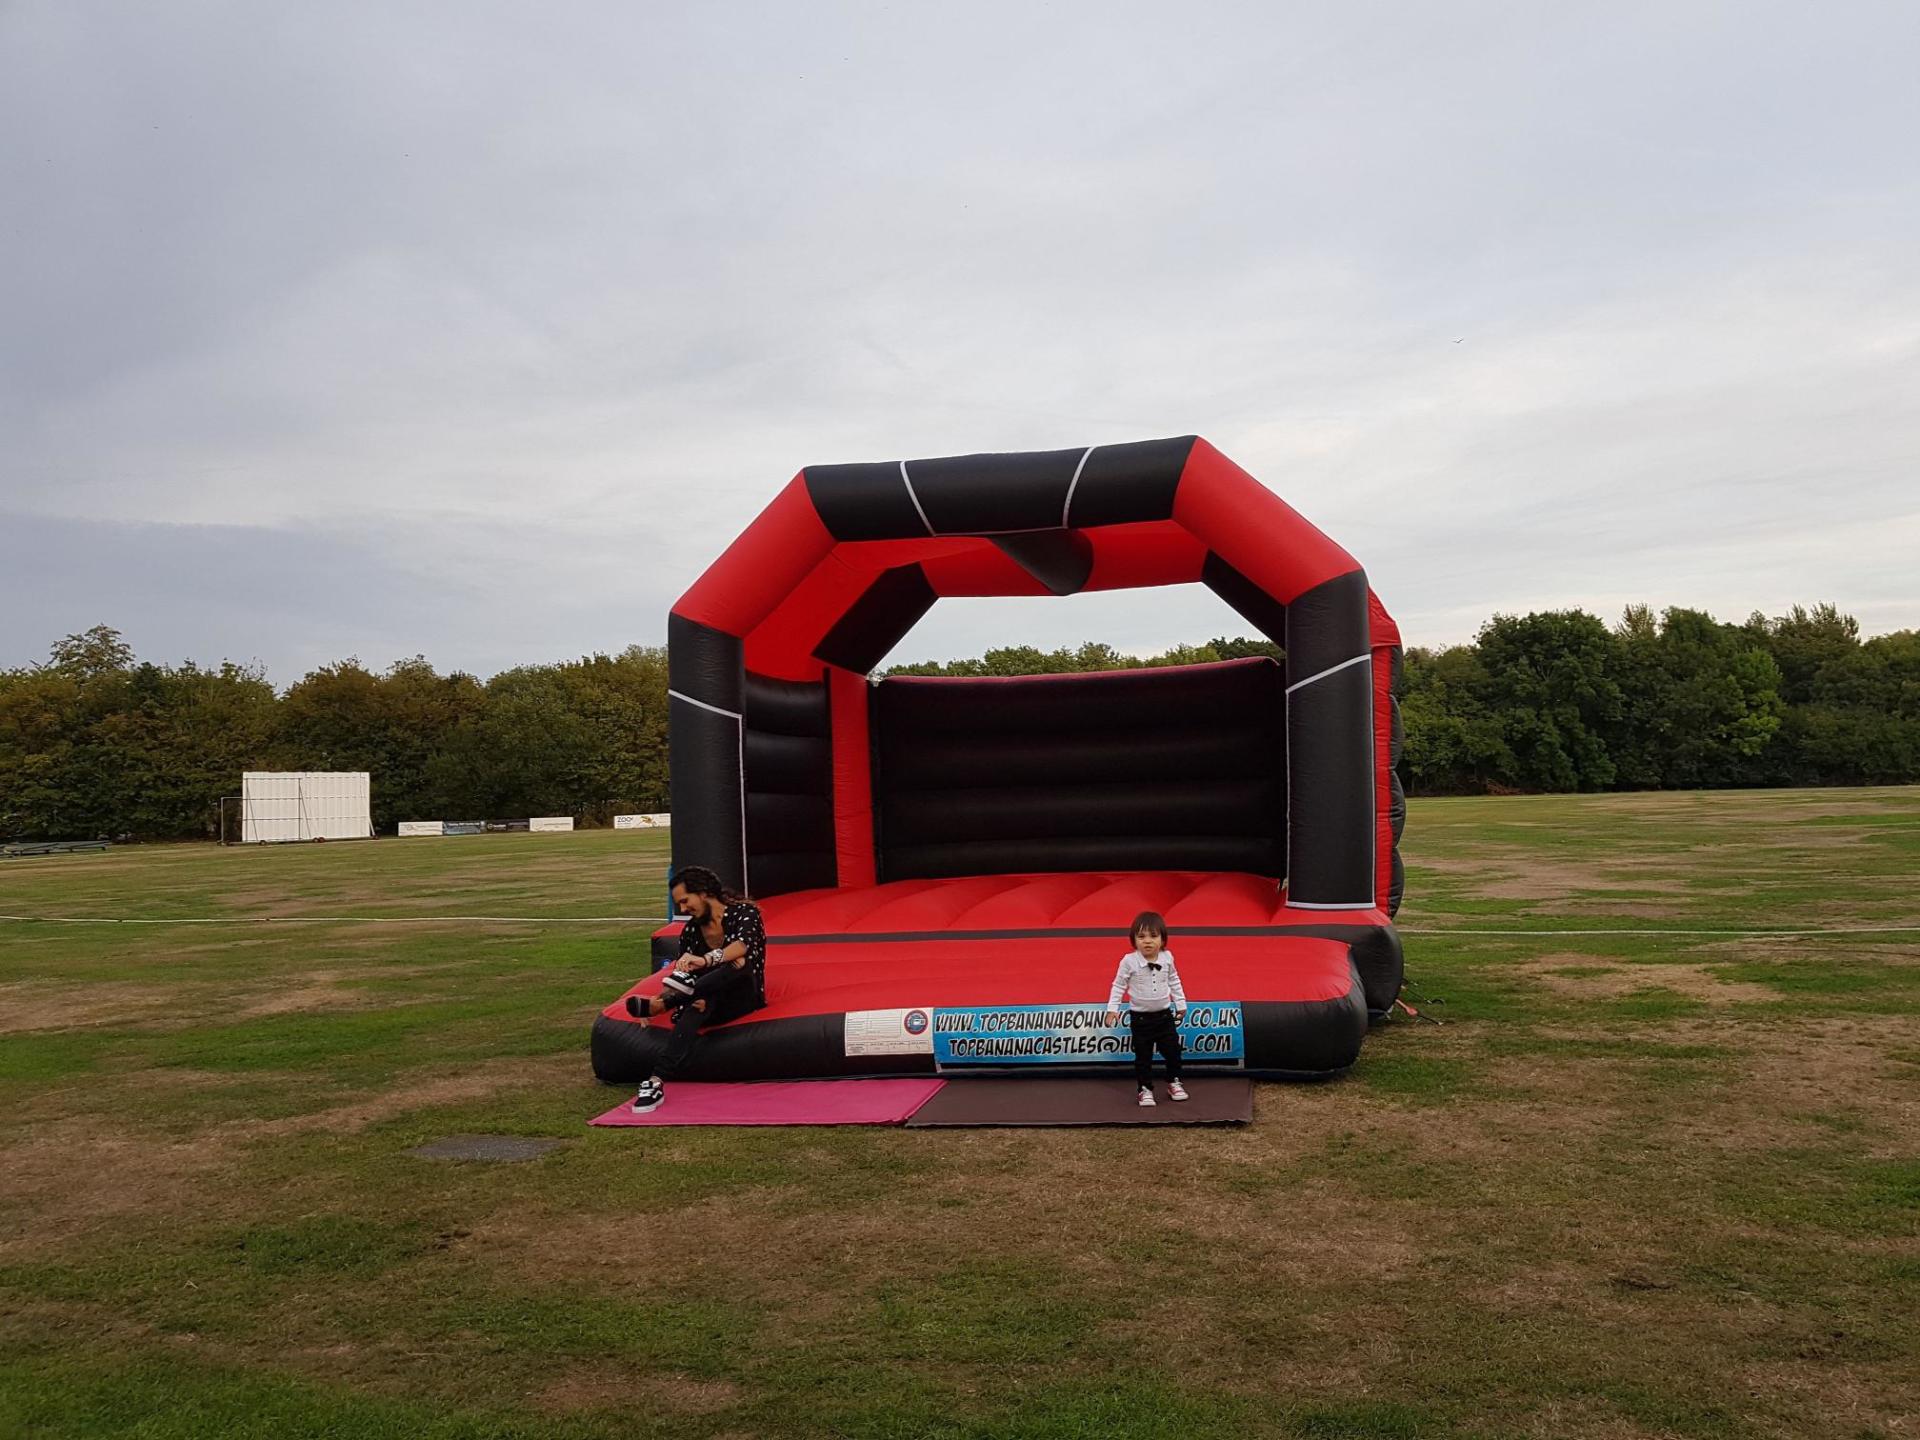 large red and black bouncy castle in a field